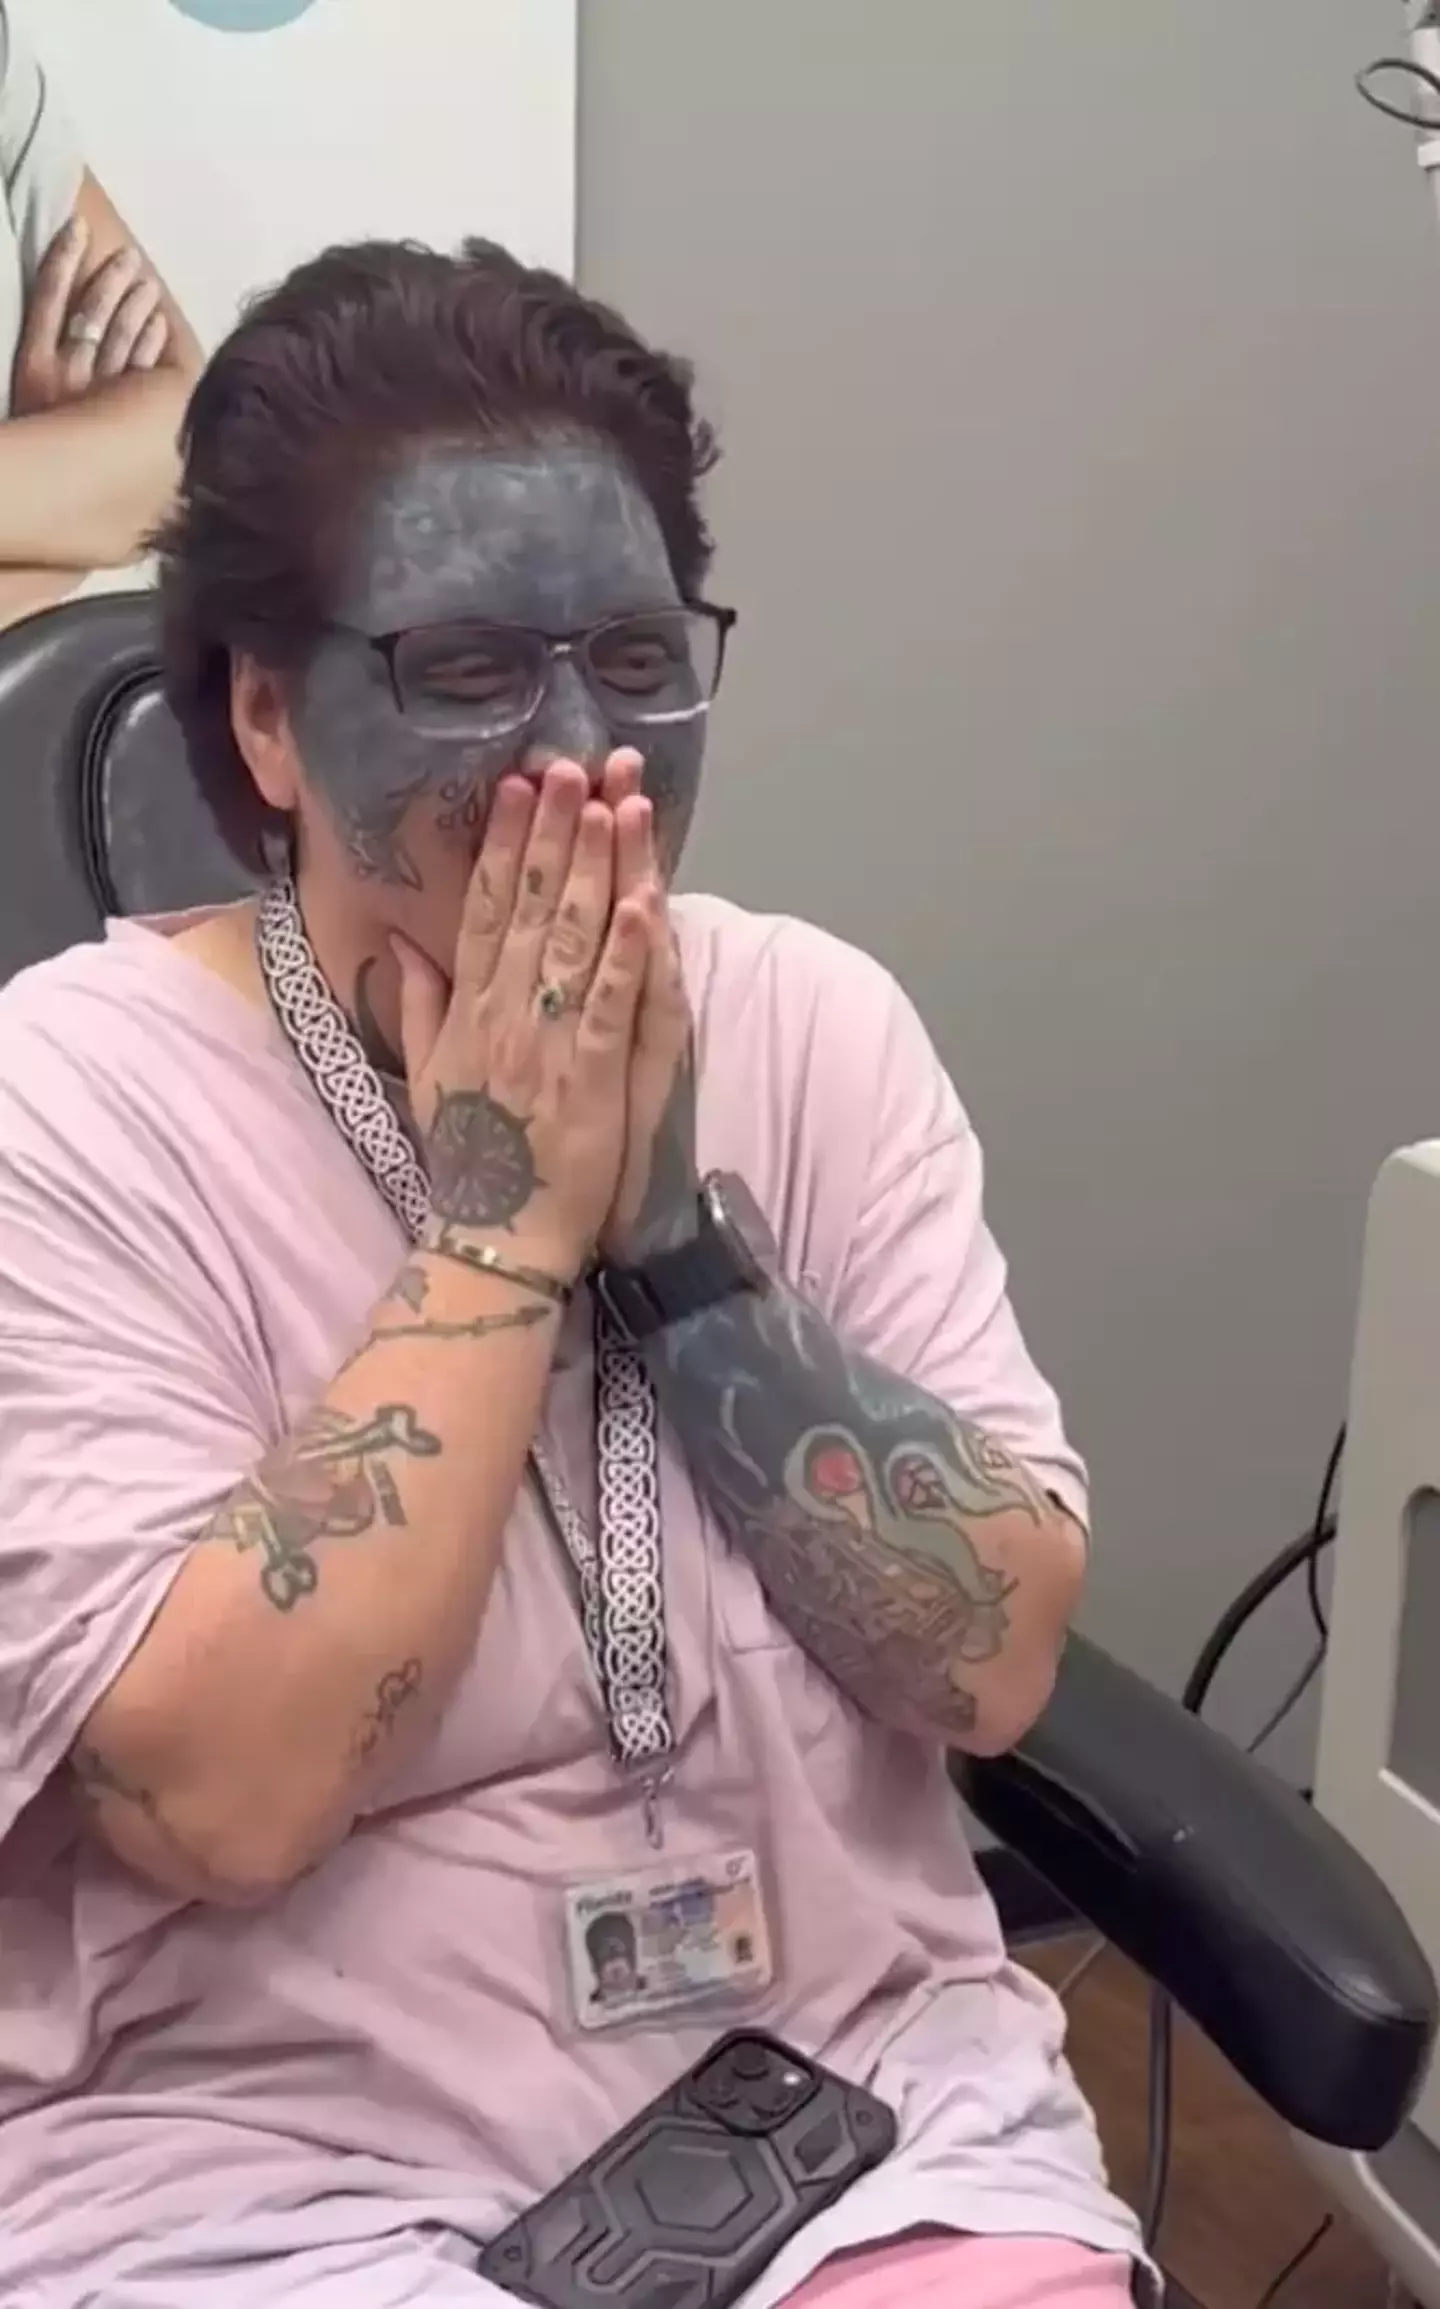 A woman who claims her face was tattooed with 'really horrible things' against her will wasn't able to get a job due to it.